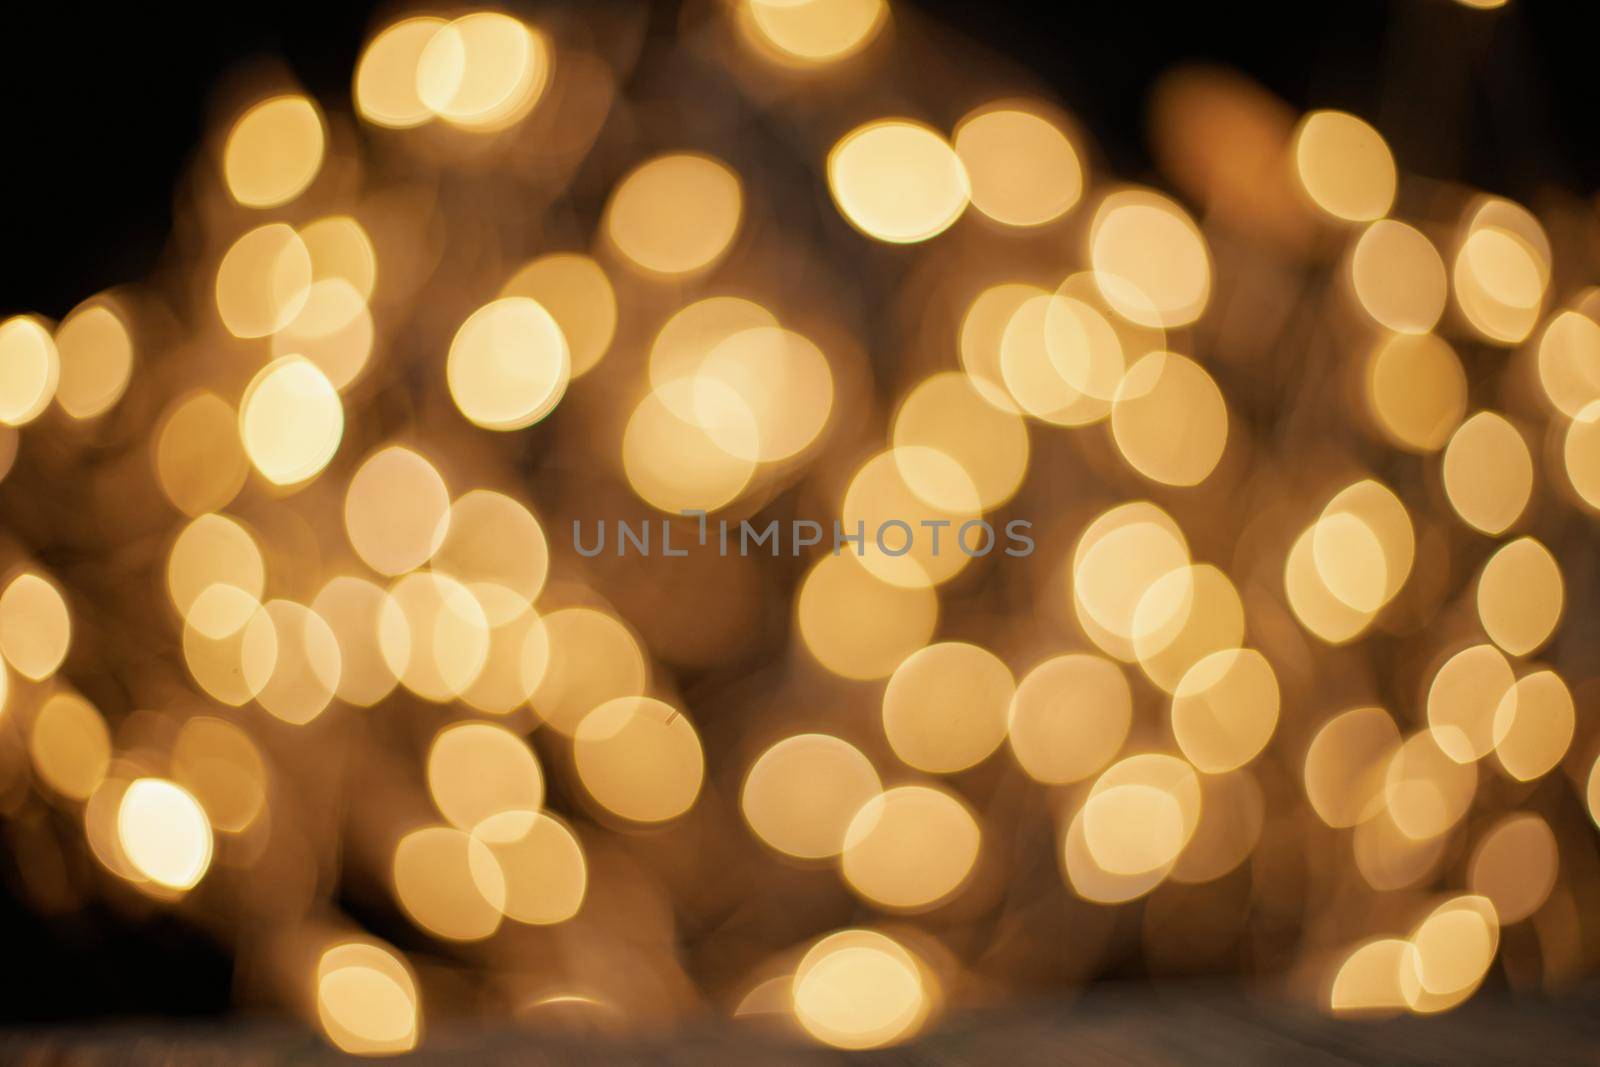 blurred golden lights on a black background . photo with a copy-space.